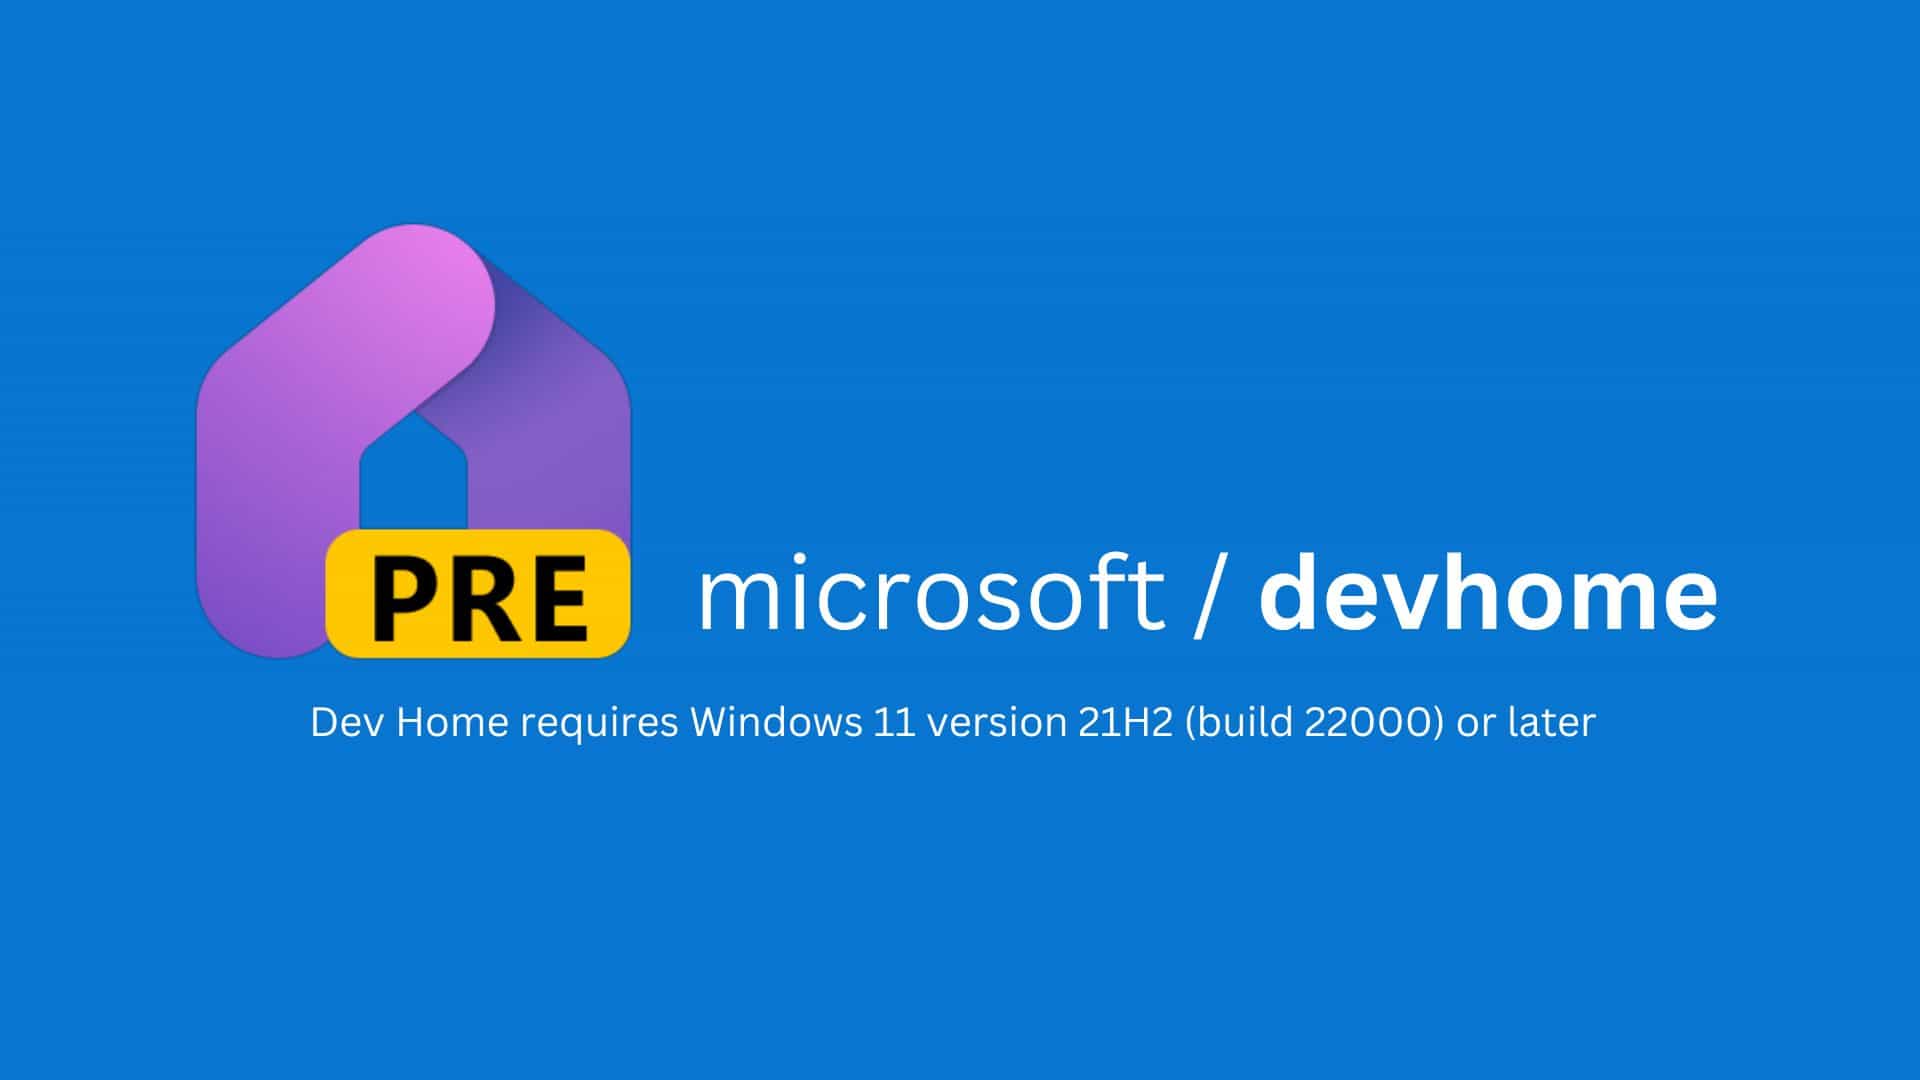 What's new and improved in Microsoft Dev Home Preview 0.4?